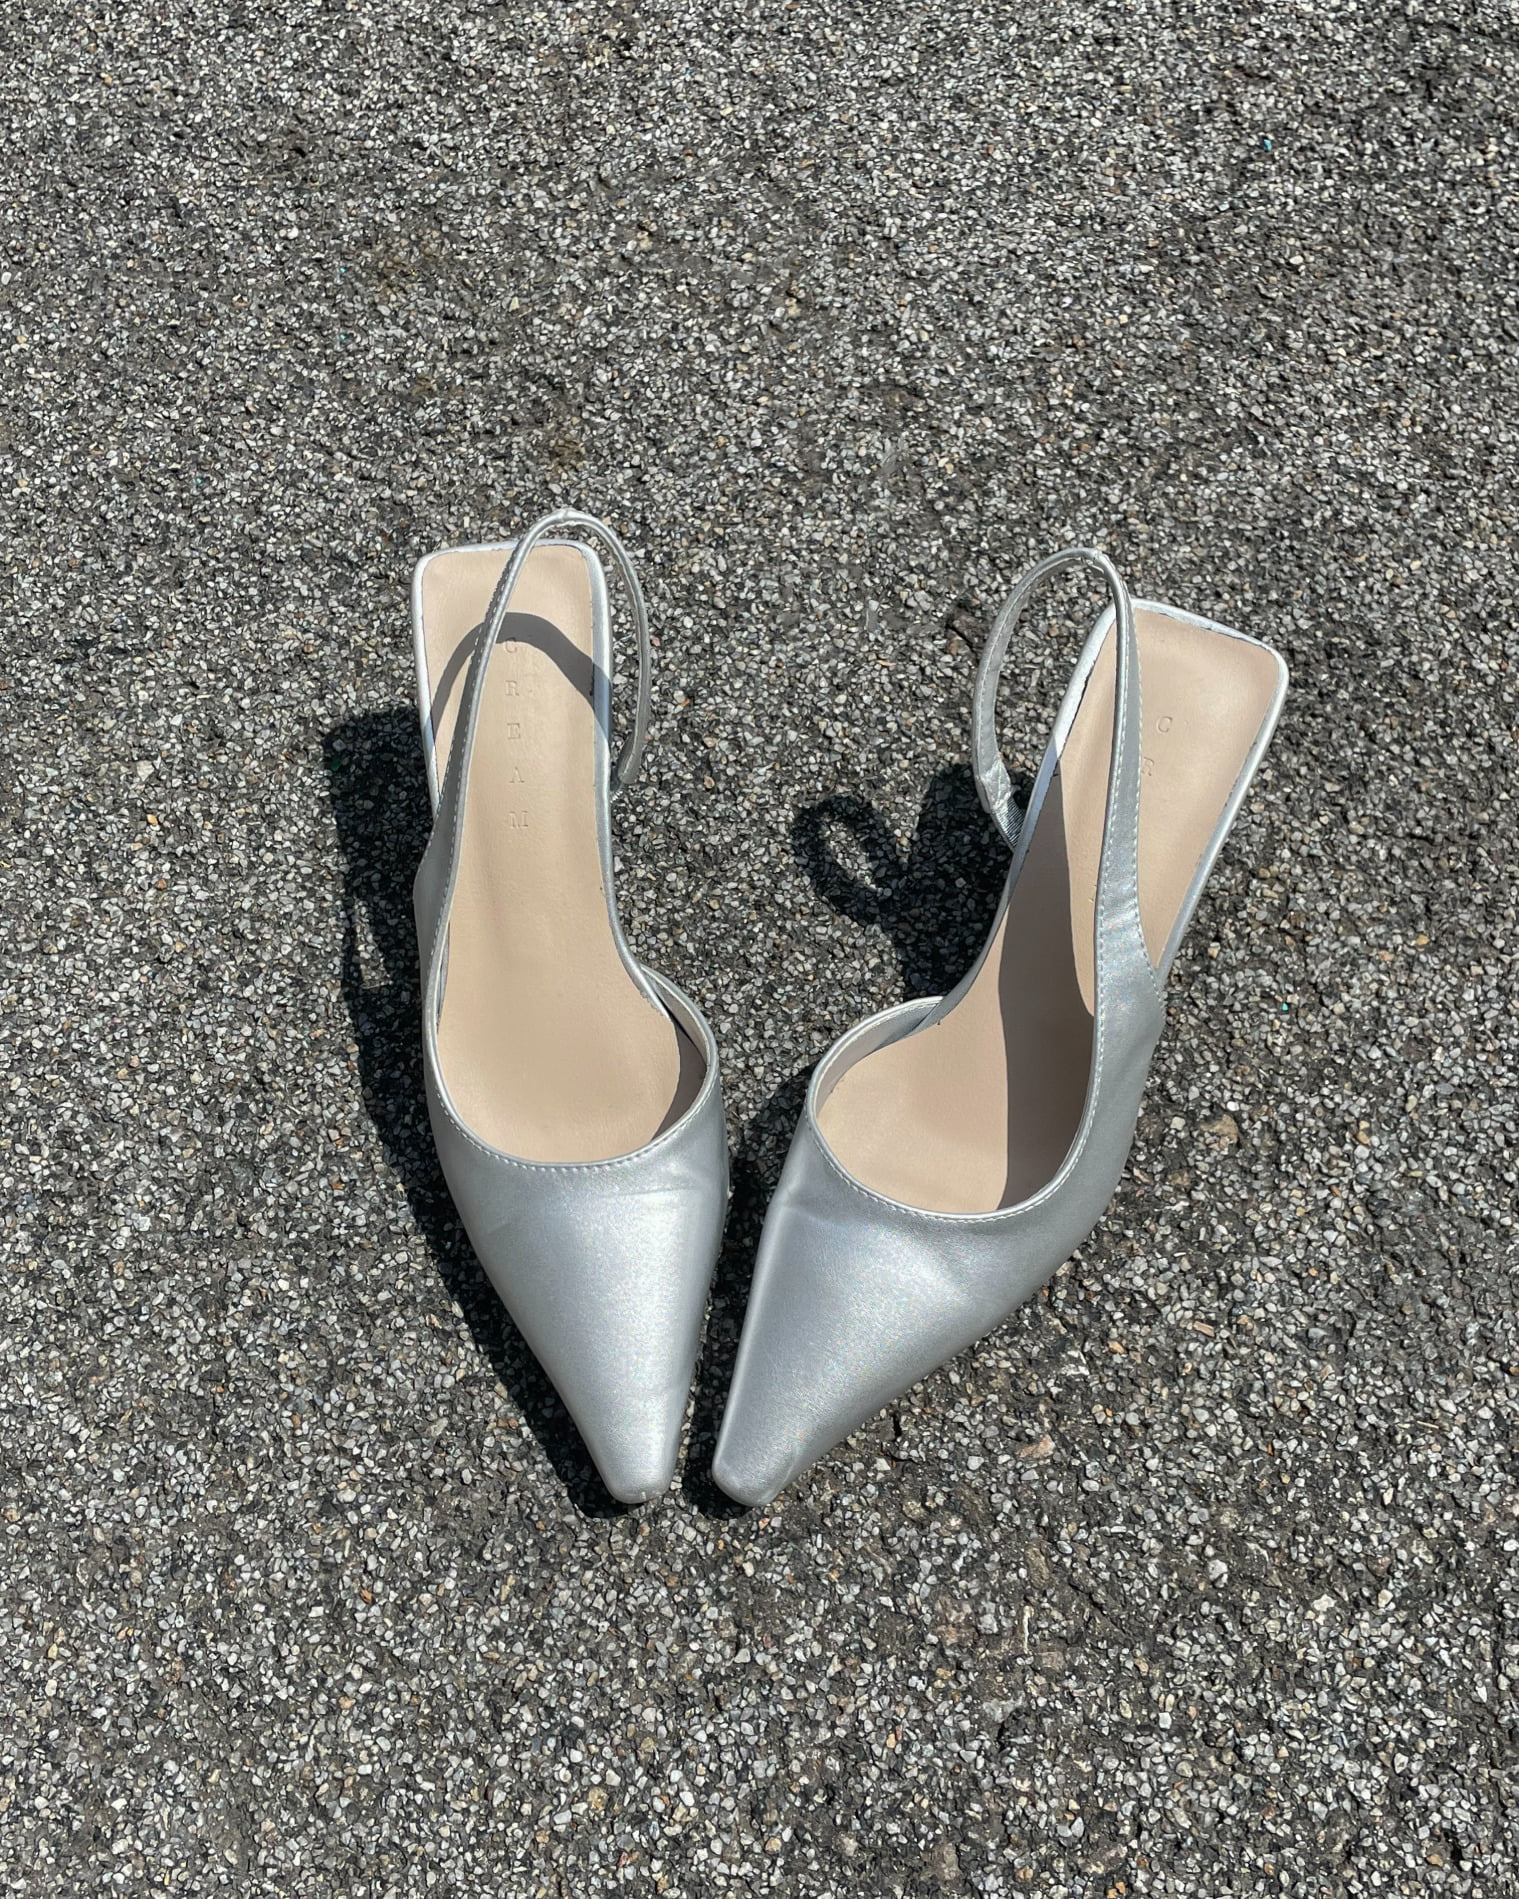 Pointed slingback